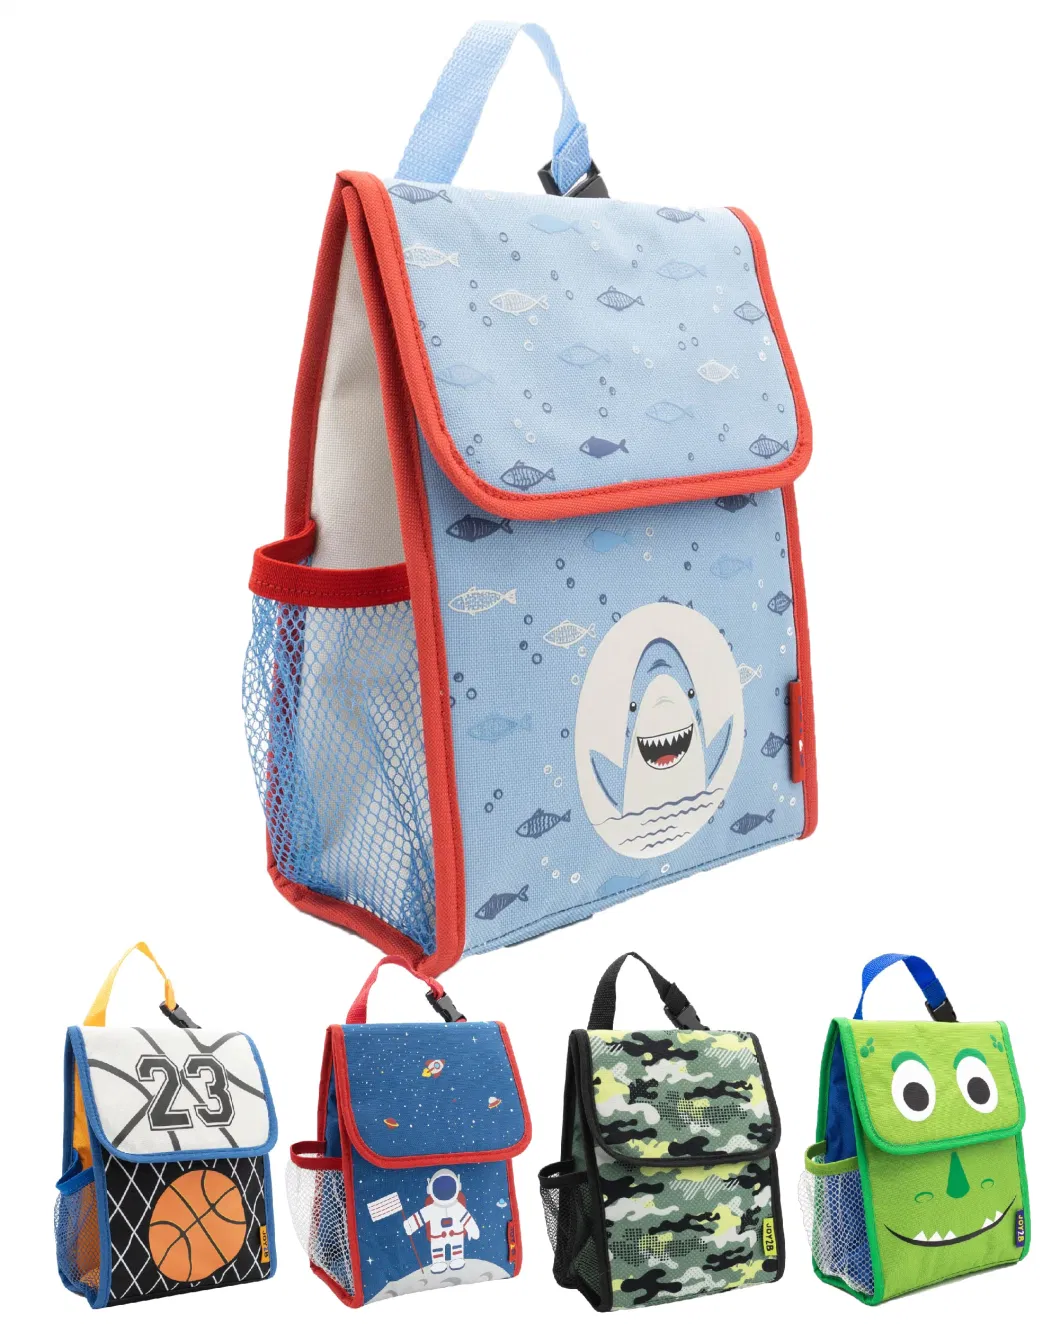 Insulated Dino Lunch Bag Kids with Water Bottle Holder Reusable Snack Bags for Boys and Girls Dinosaur Lunch Box Kids Perfect for School